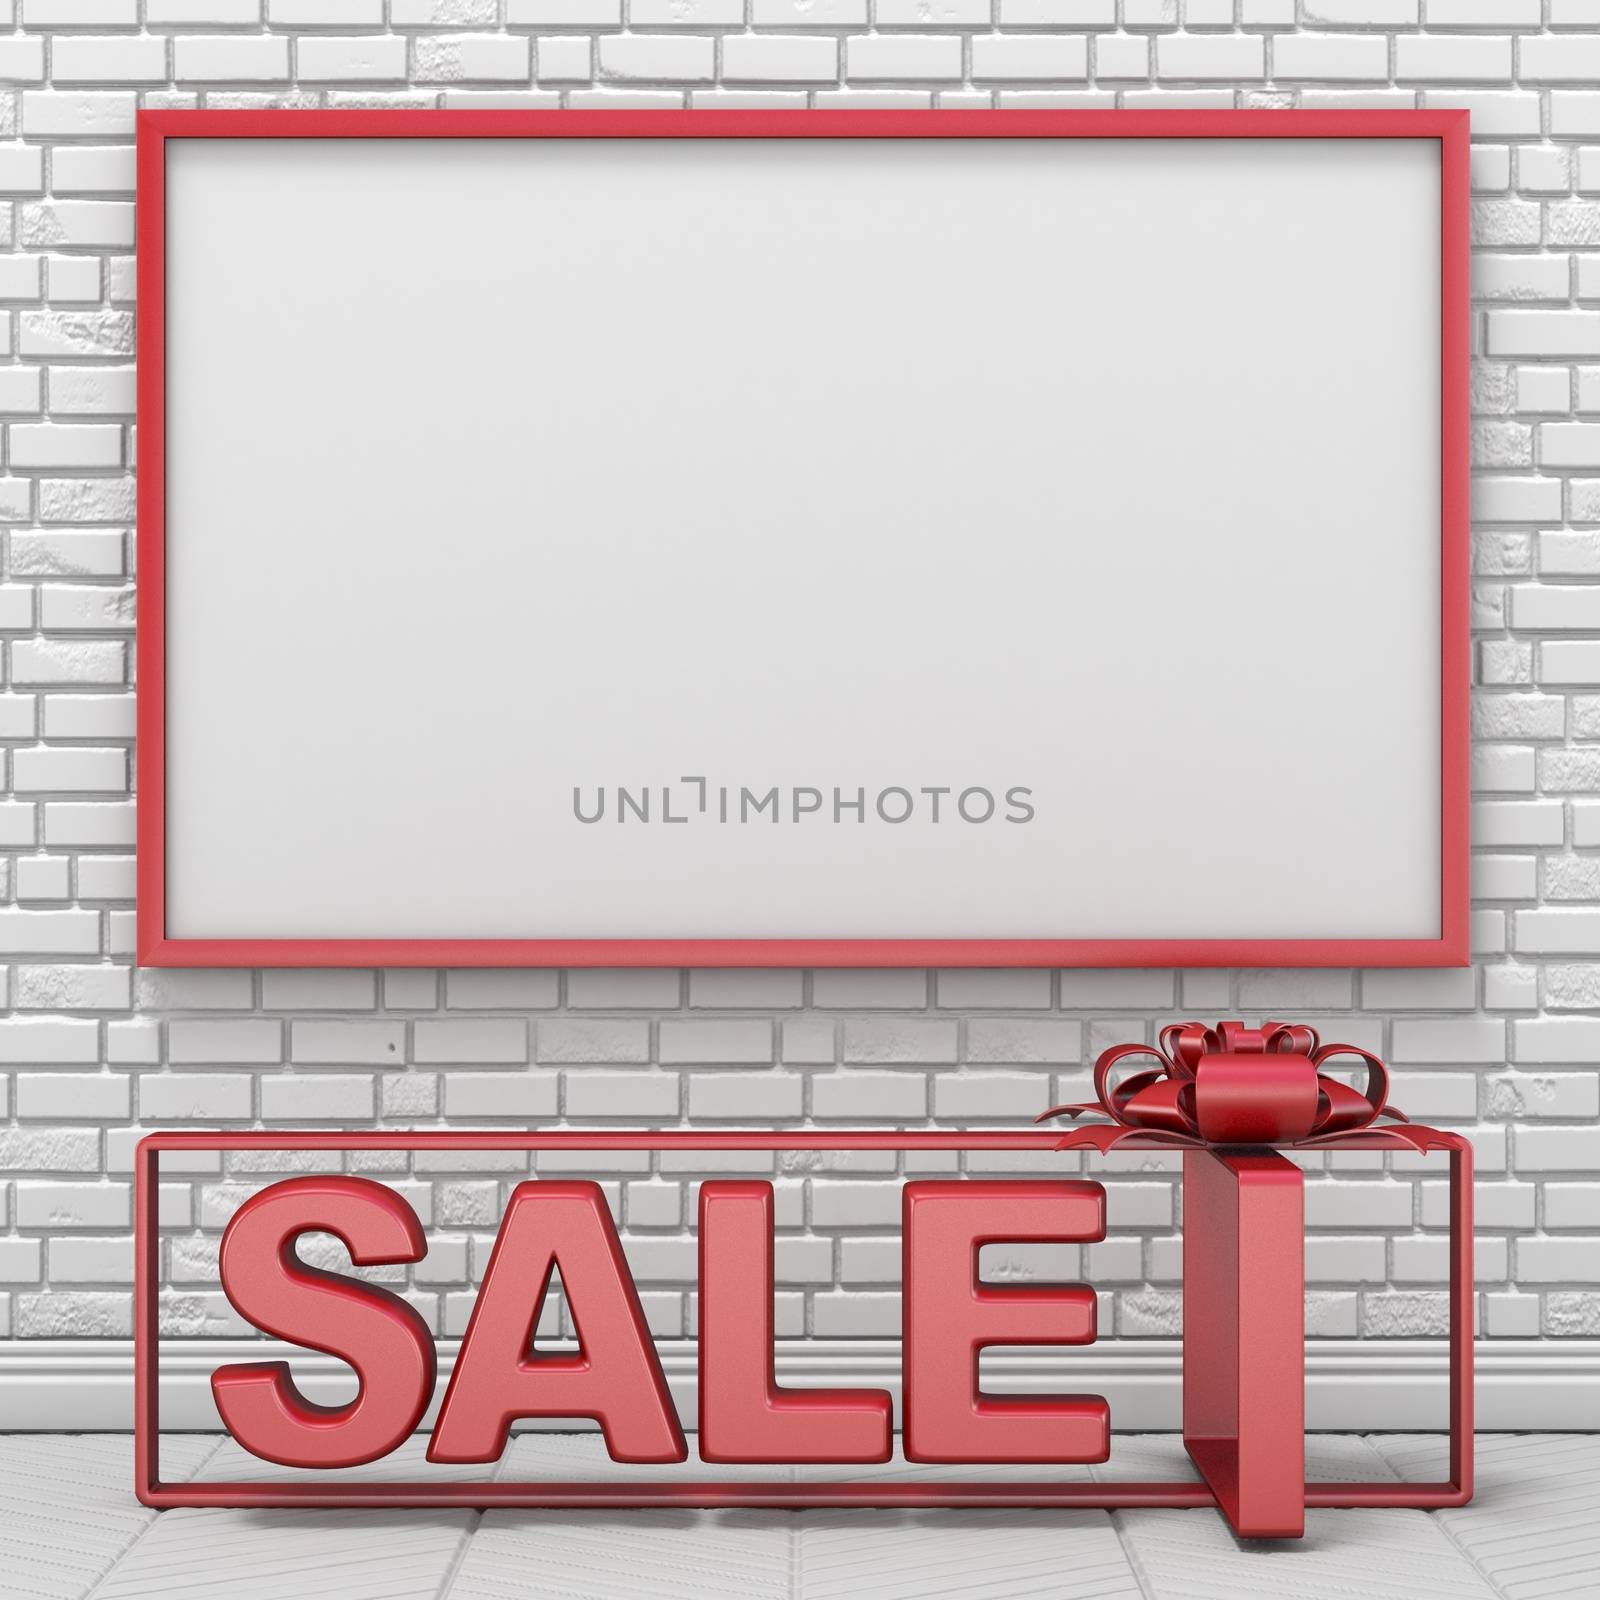 Mock up blank picture frame and text SALE into gift box 3D render illustration